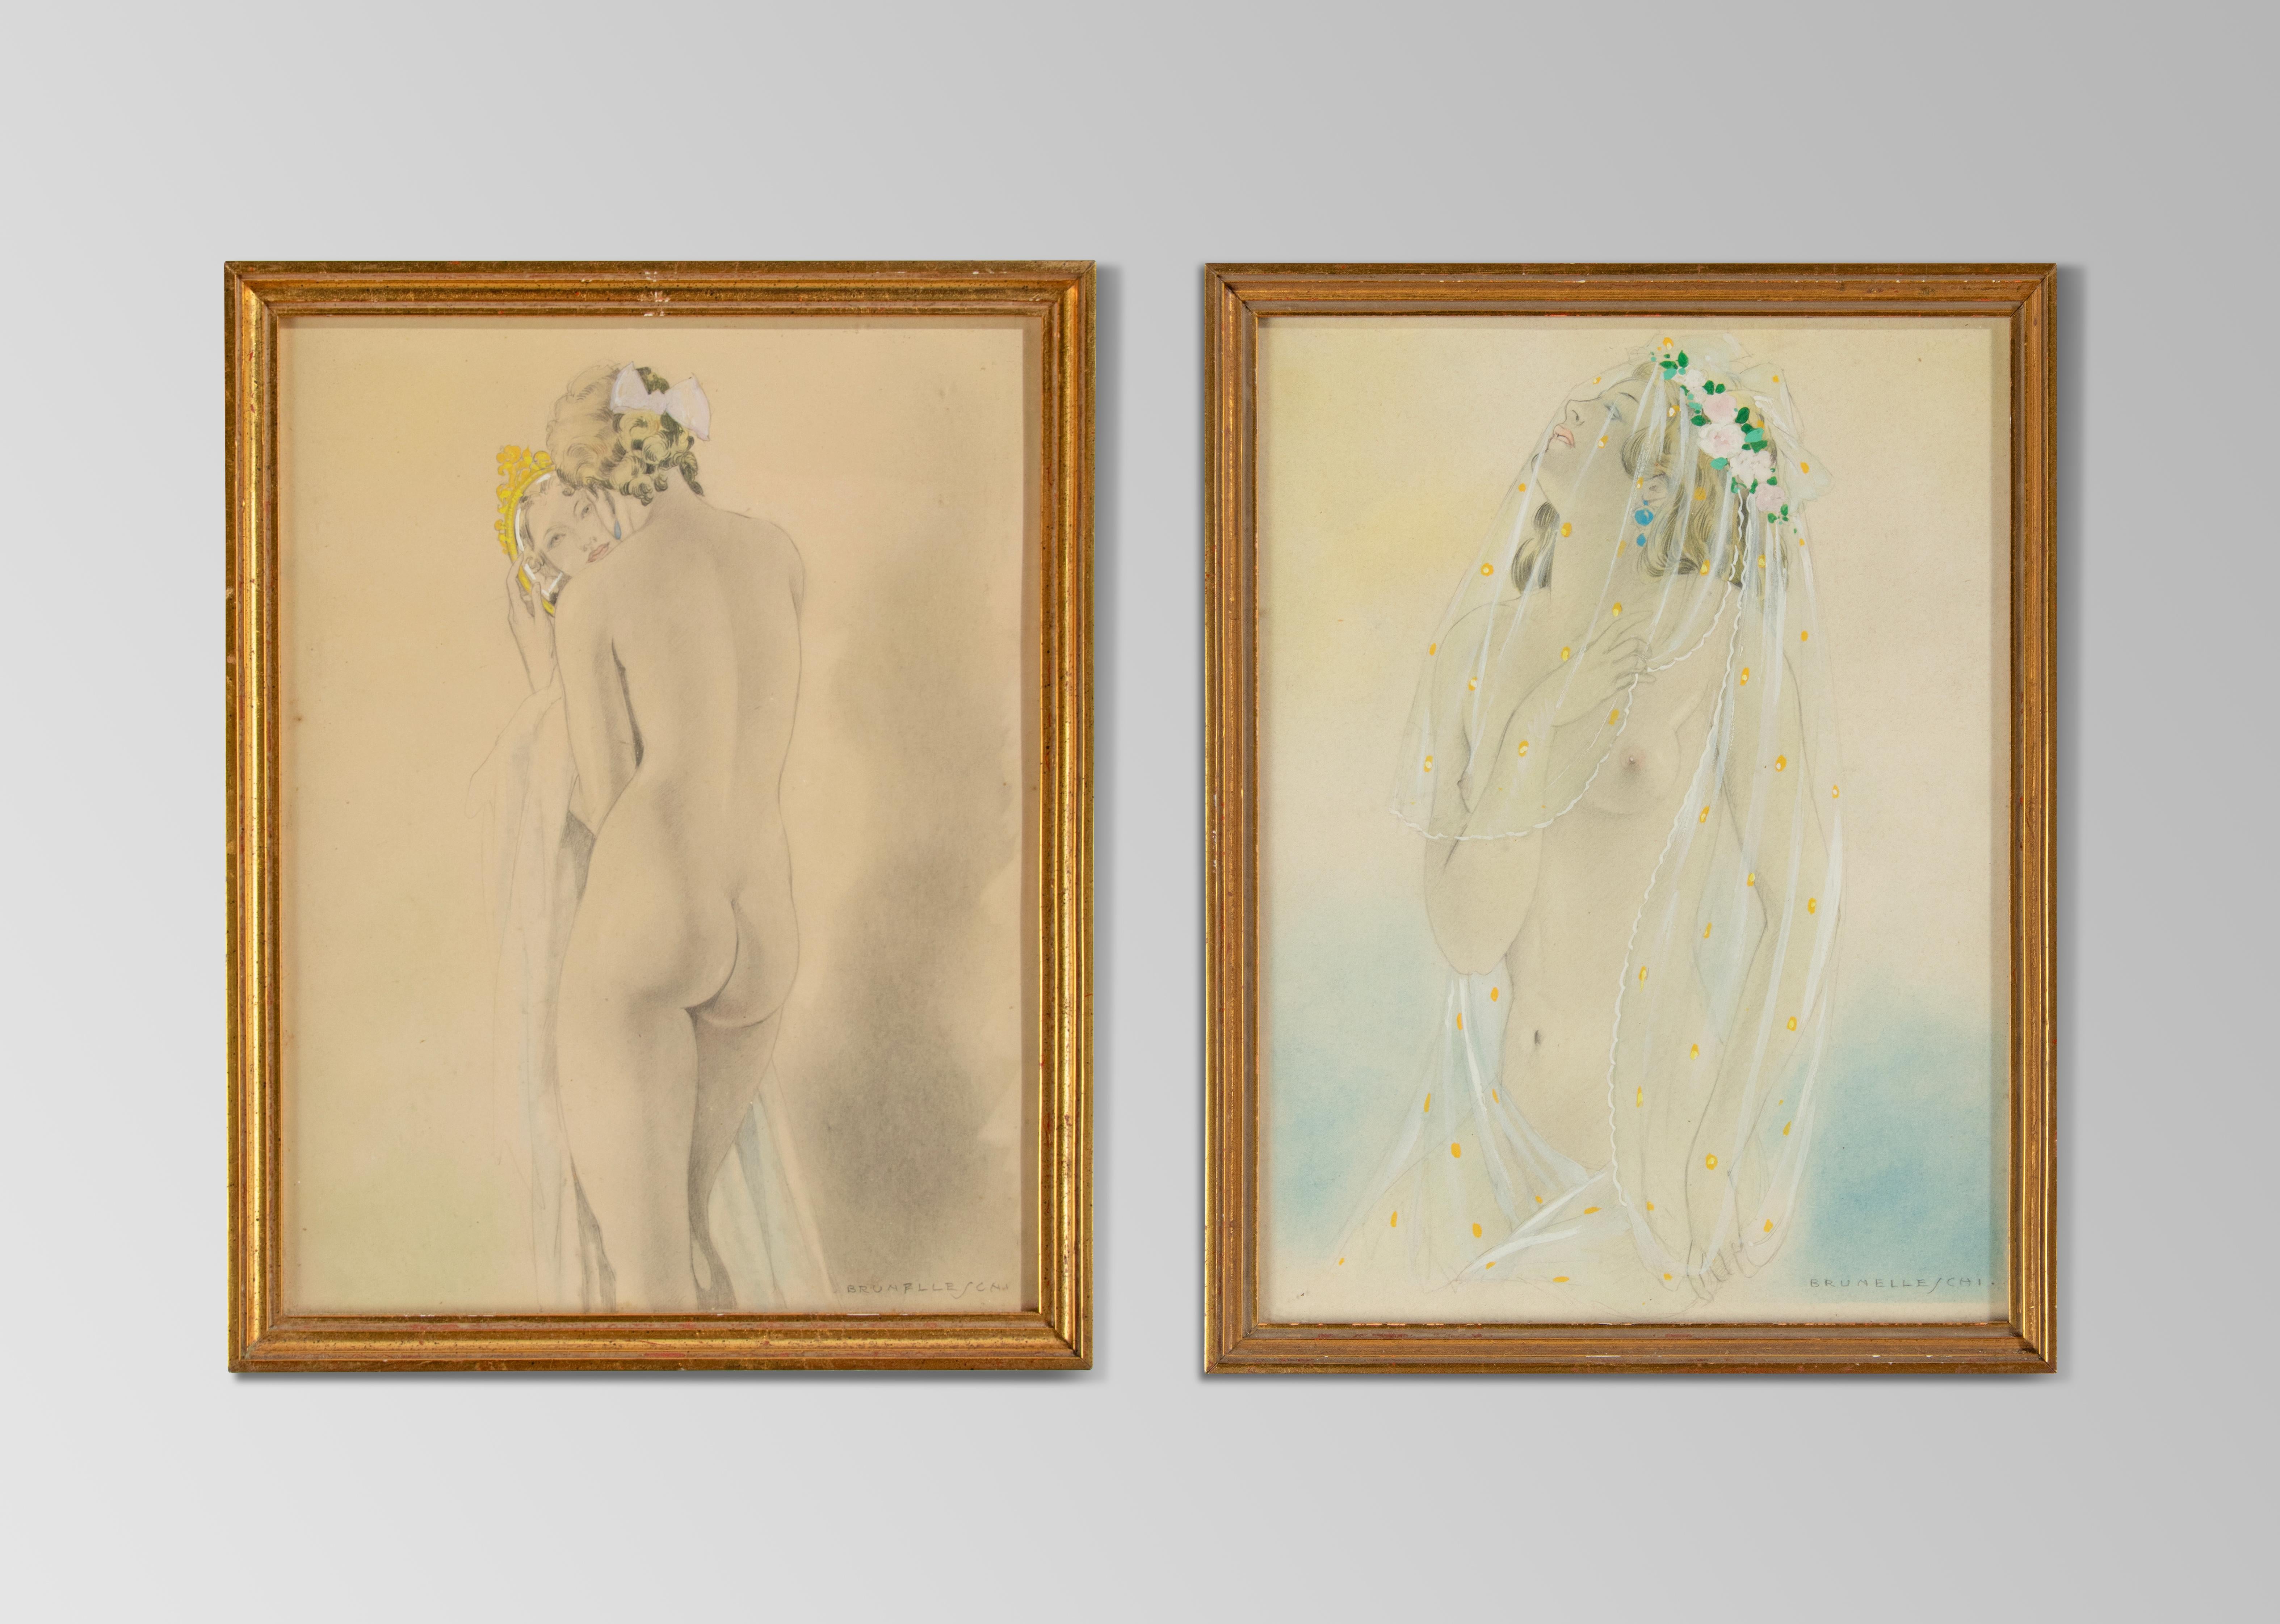 A few beautiful works of art by the Italian artist Umberto Brunelleschi. They are female nudes, slightly erotic in appearance with a beautiful display of transparent fabrics.
Dimensions frame: 25,5 x 20 cm
Dimensions paper: 23,5 x 18 cm
Umberto